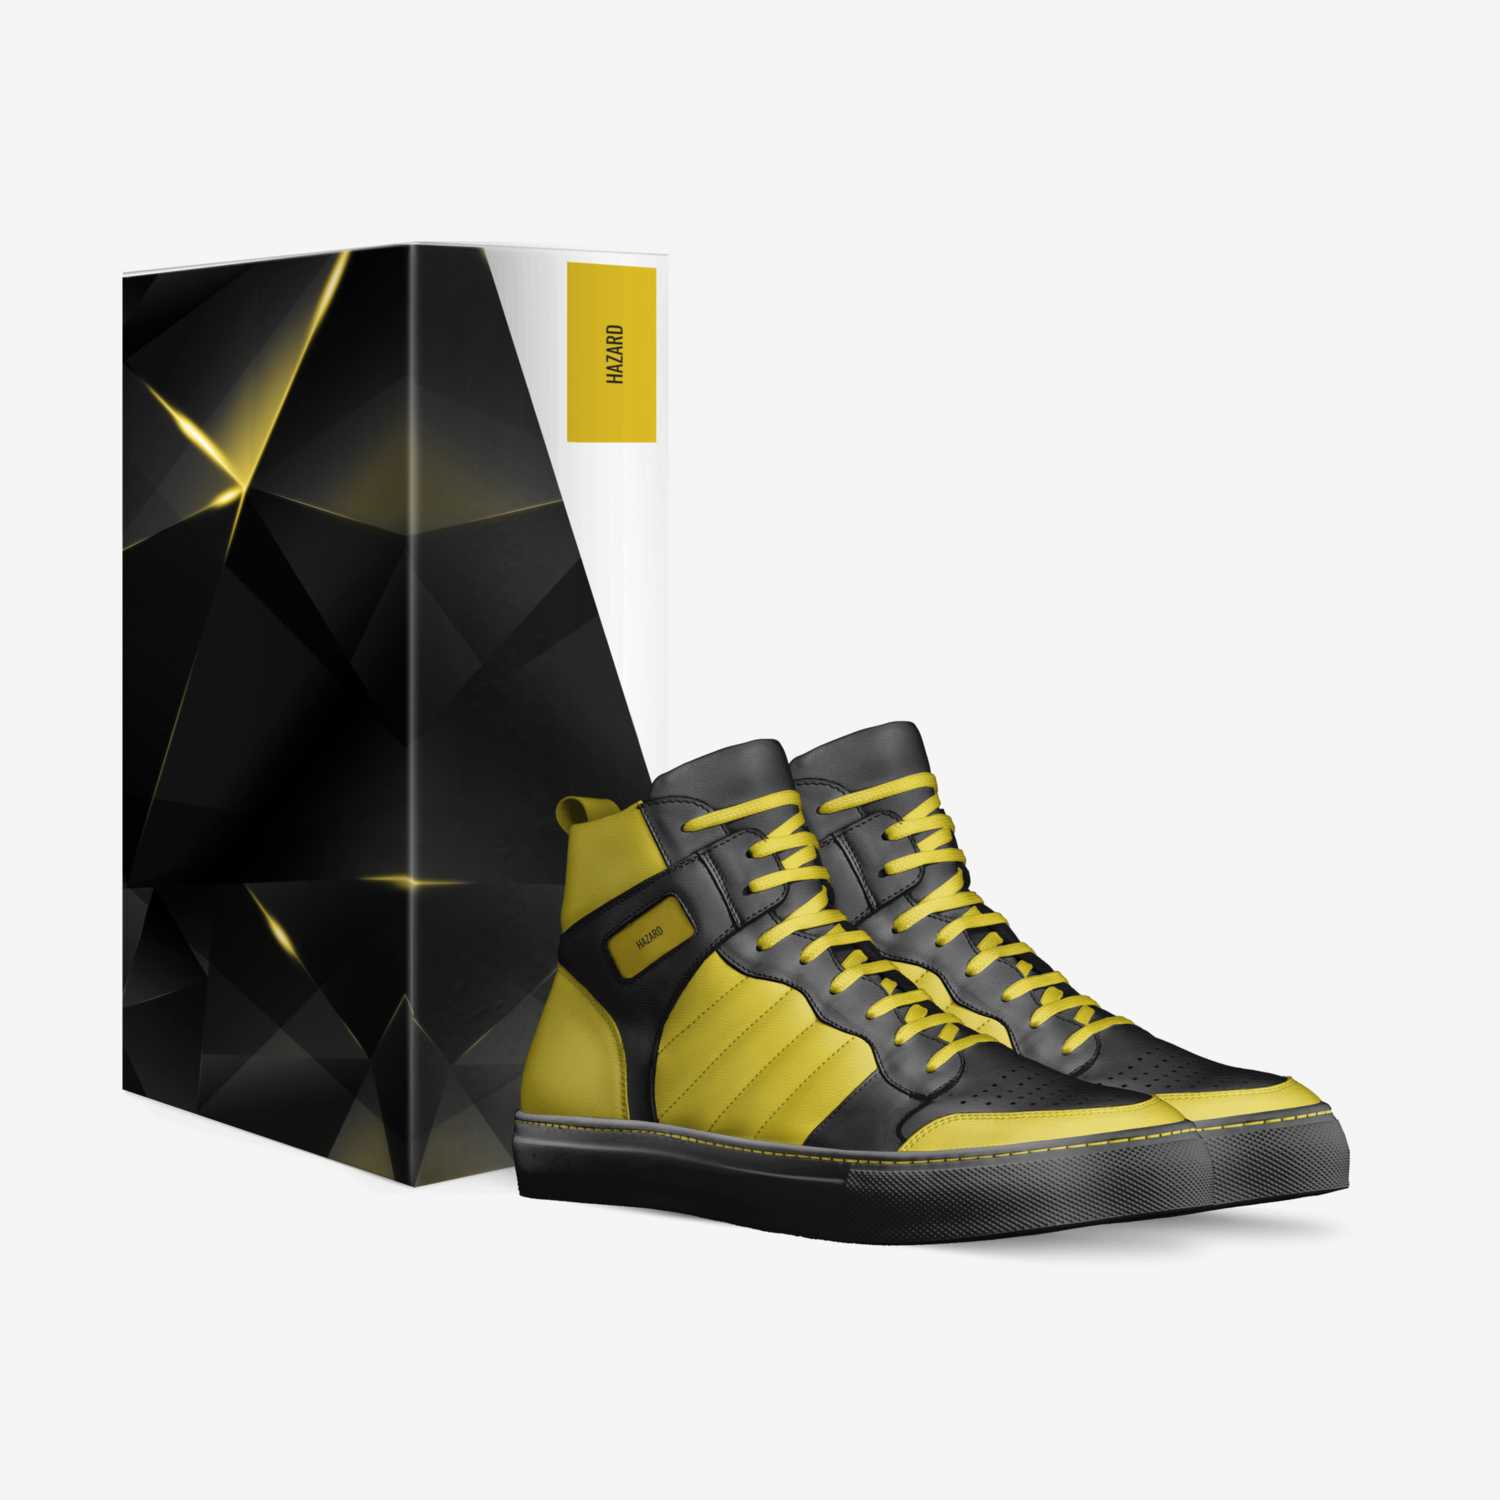 HAZARD custom made in Italy shoes by Hlubax | Box view